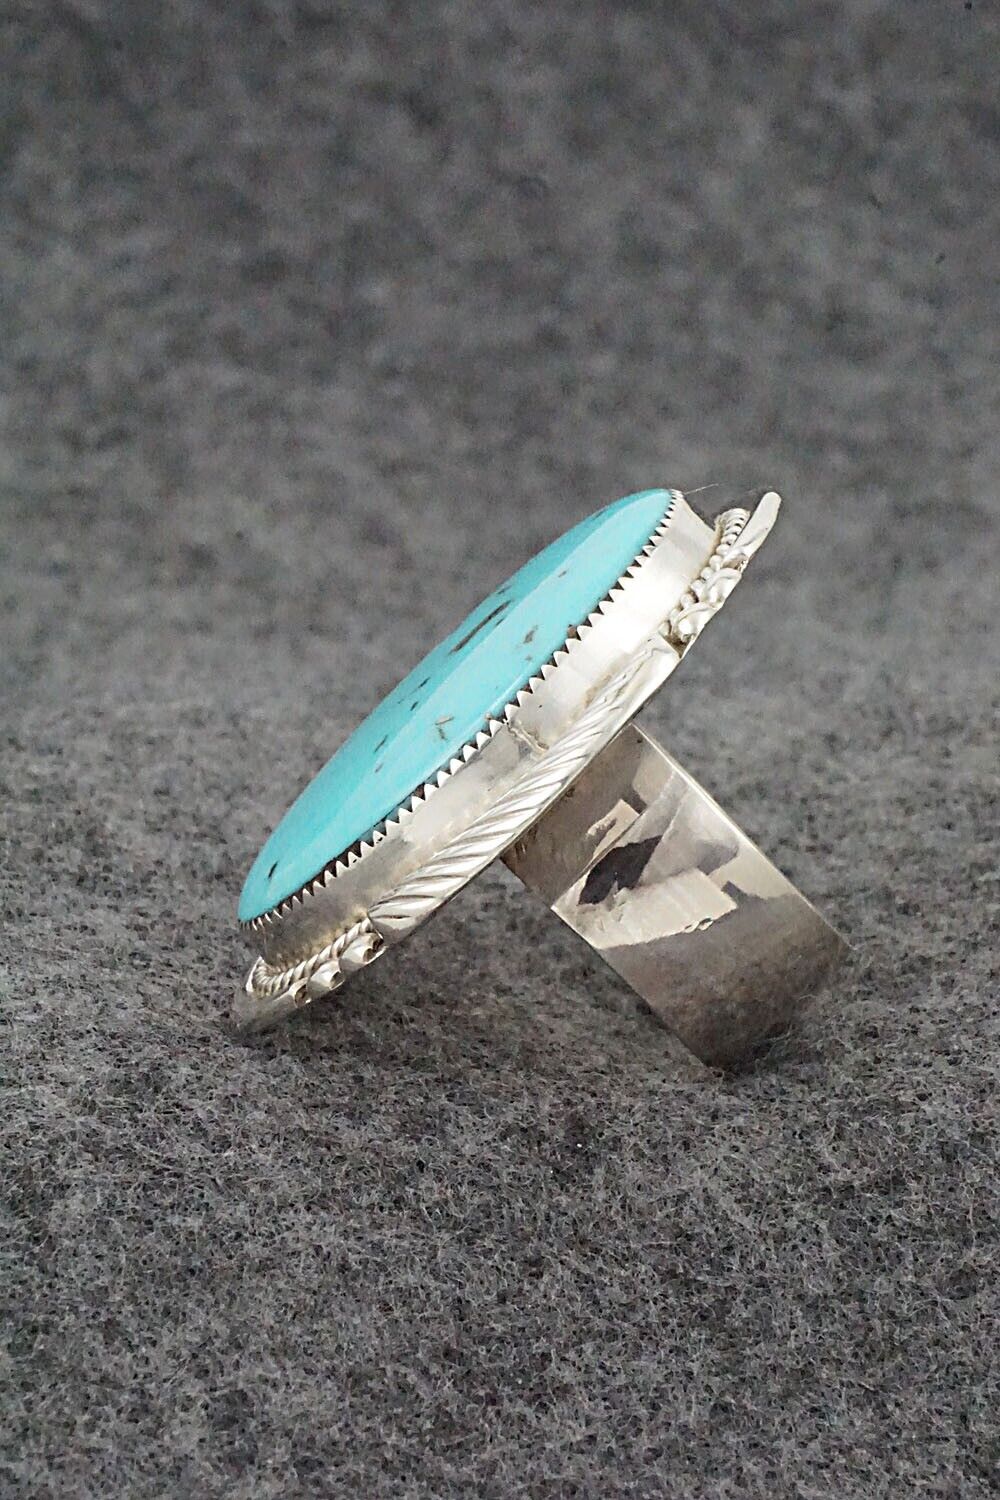 Turquoise & Sterling Silver Ring - Kenny Calavaza - Size 9